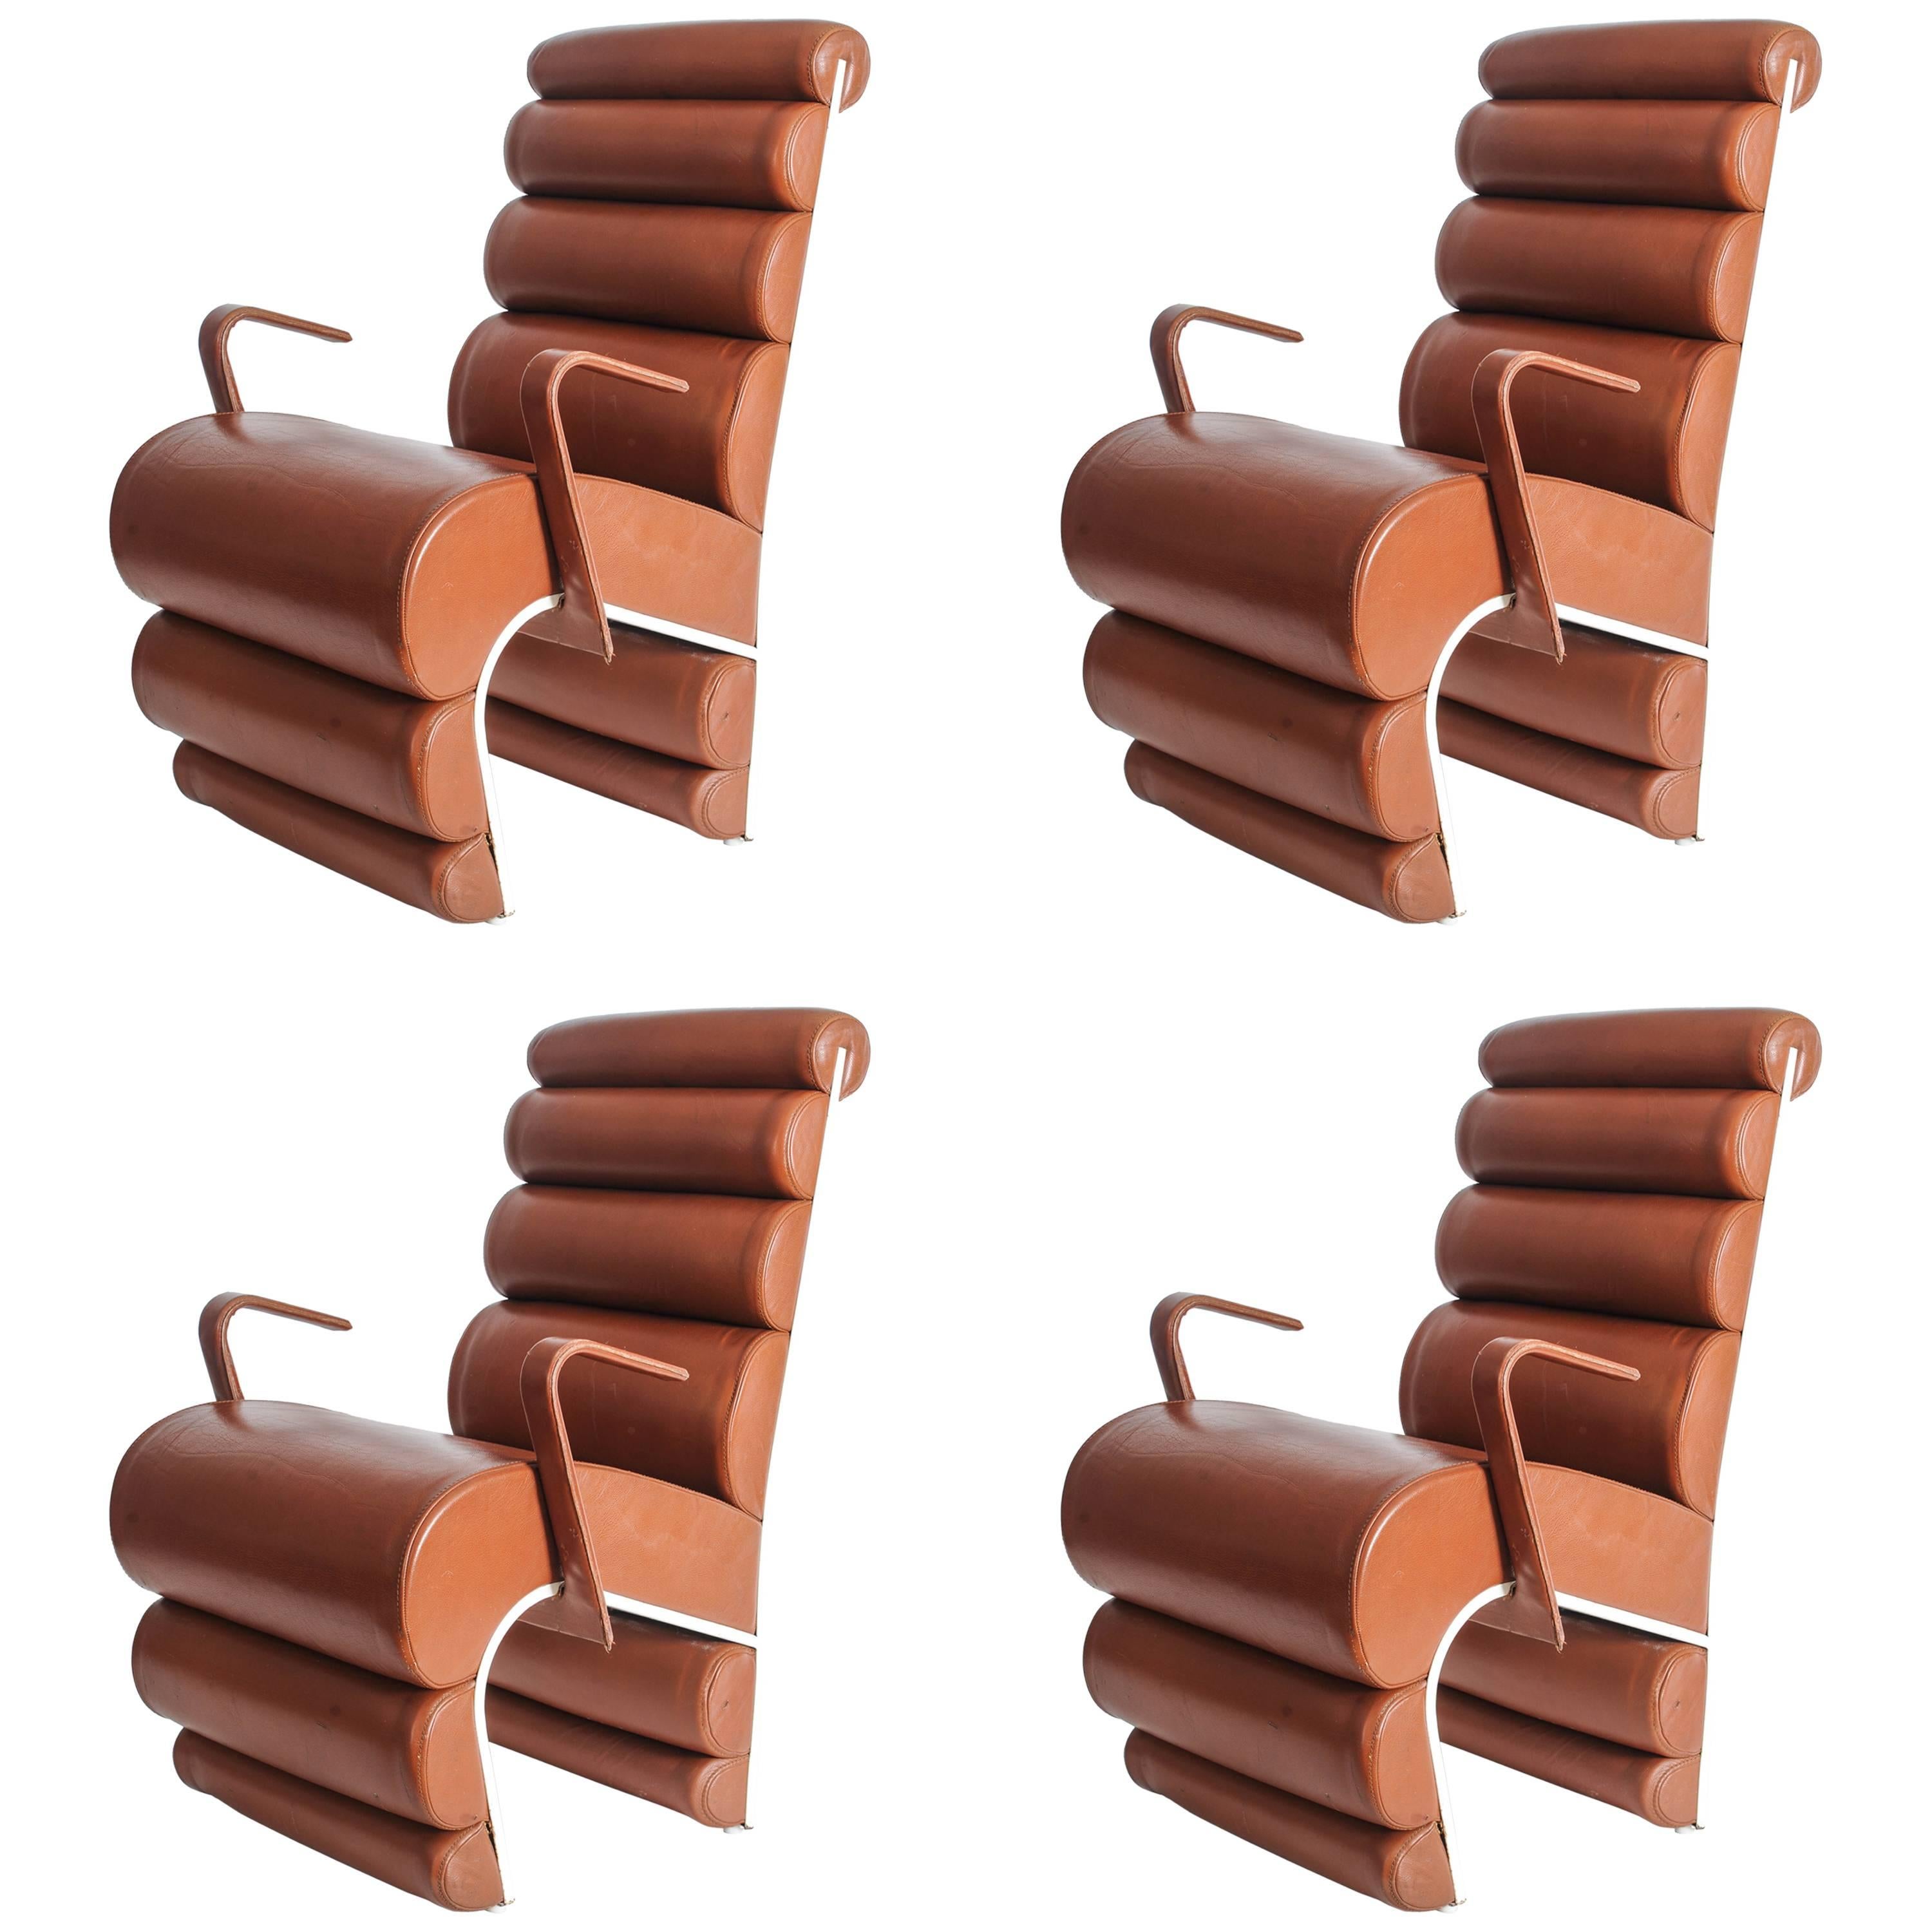 Steel and leather chairs designed for Parisian nightclub Le Queen